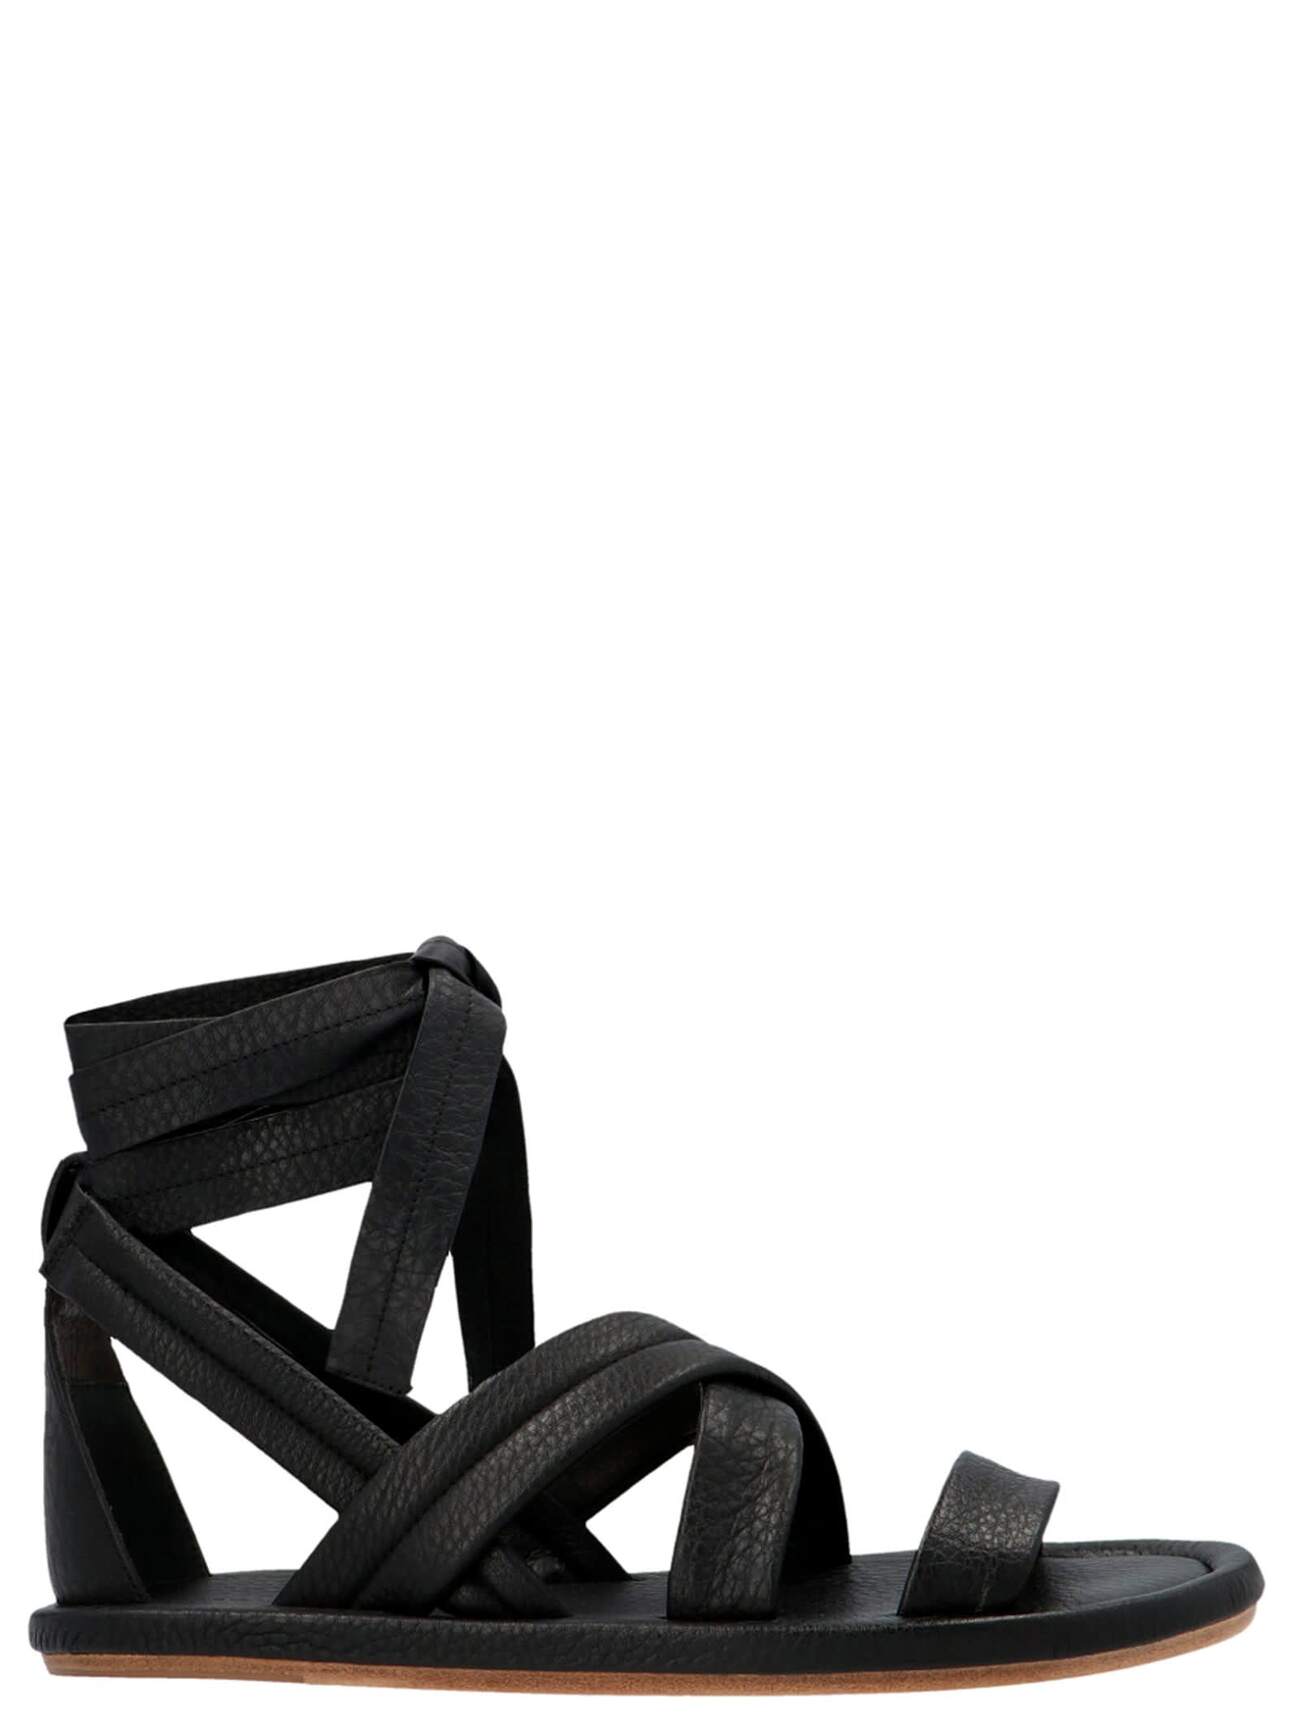 Marsell cornice Sandals in black